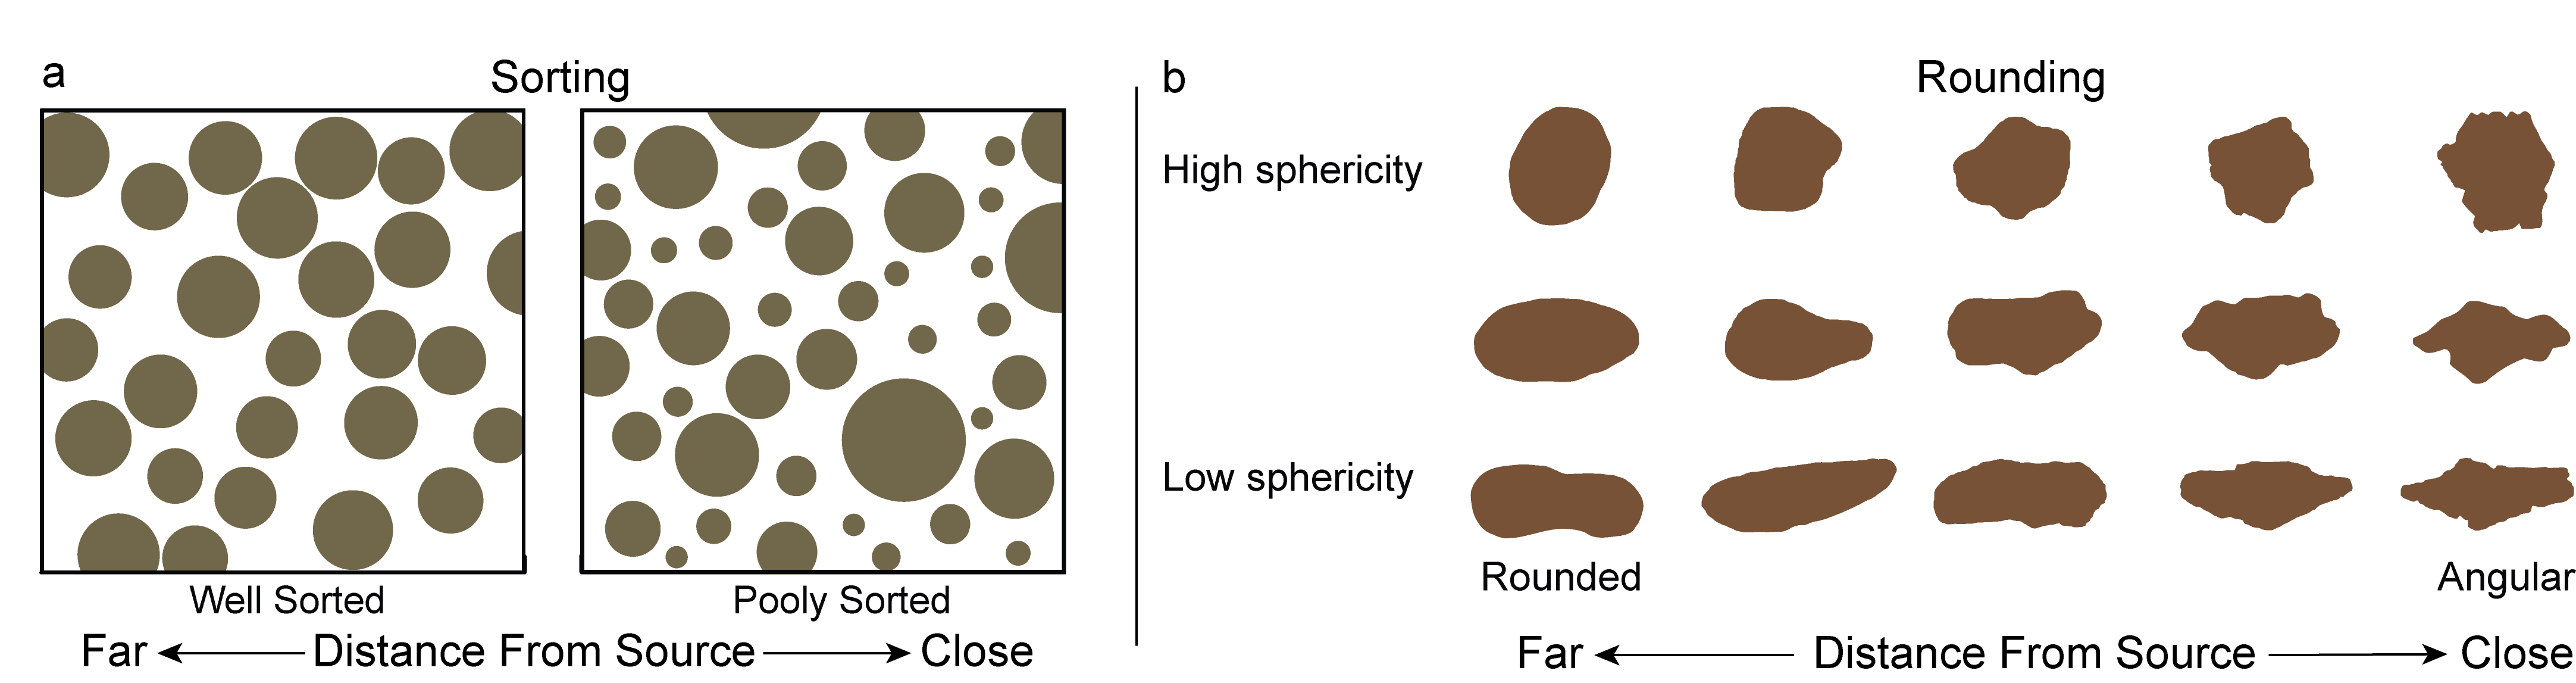 Characterizing the sorting and roundness of sediment grains.